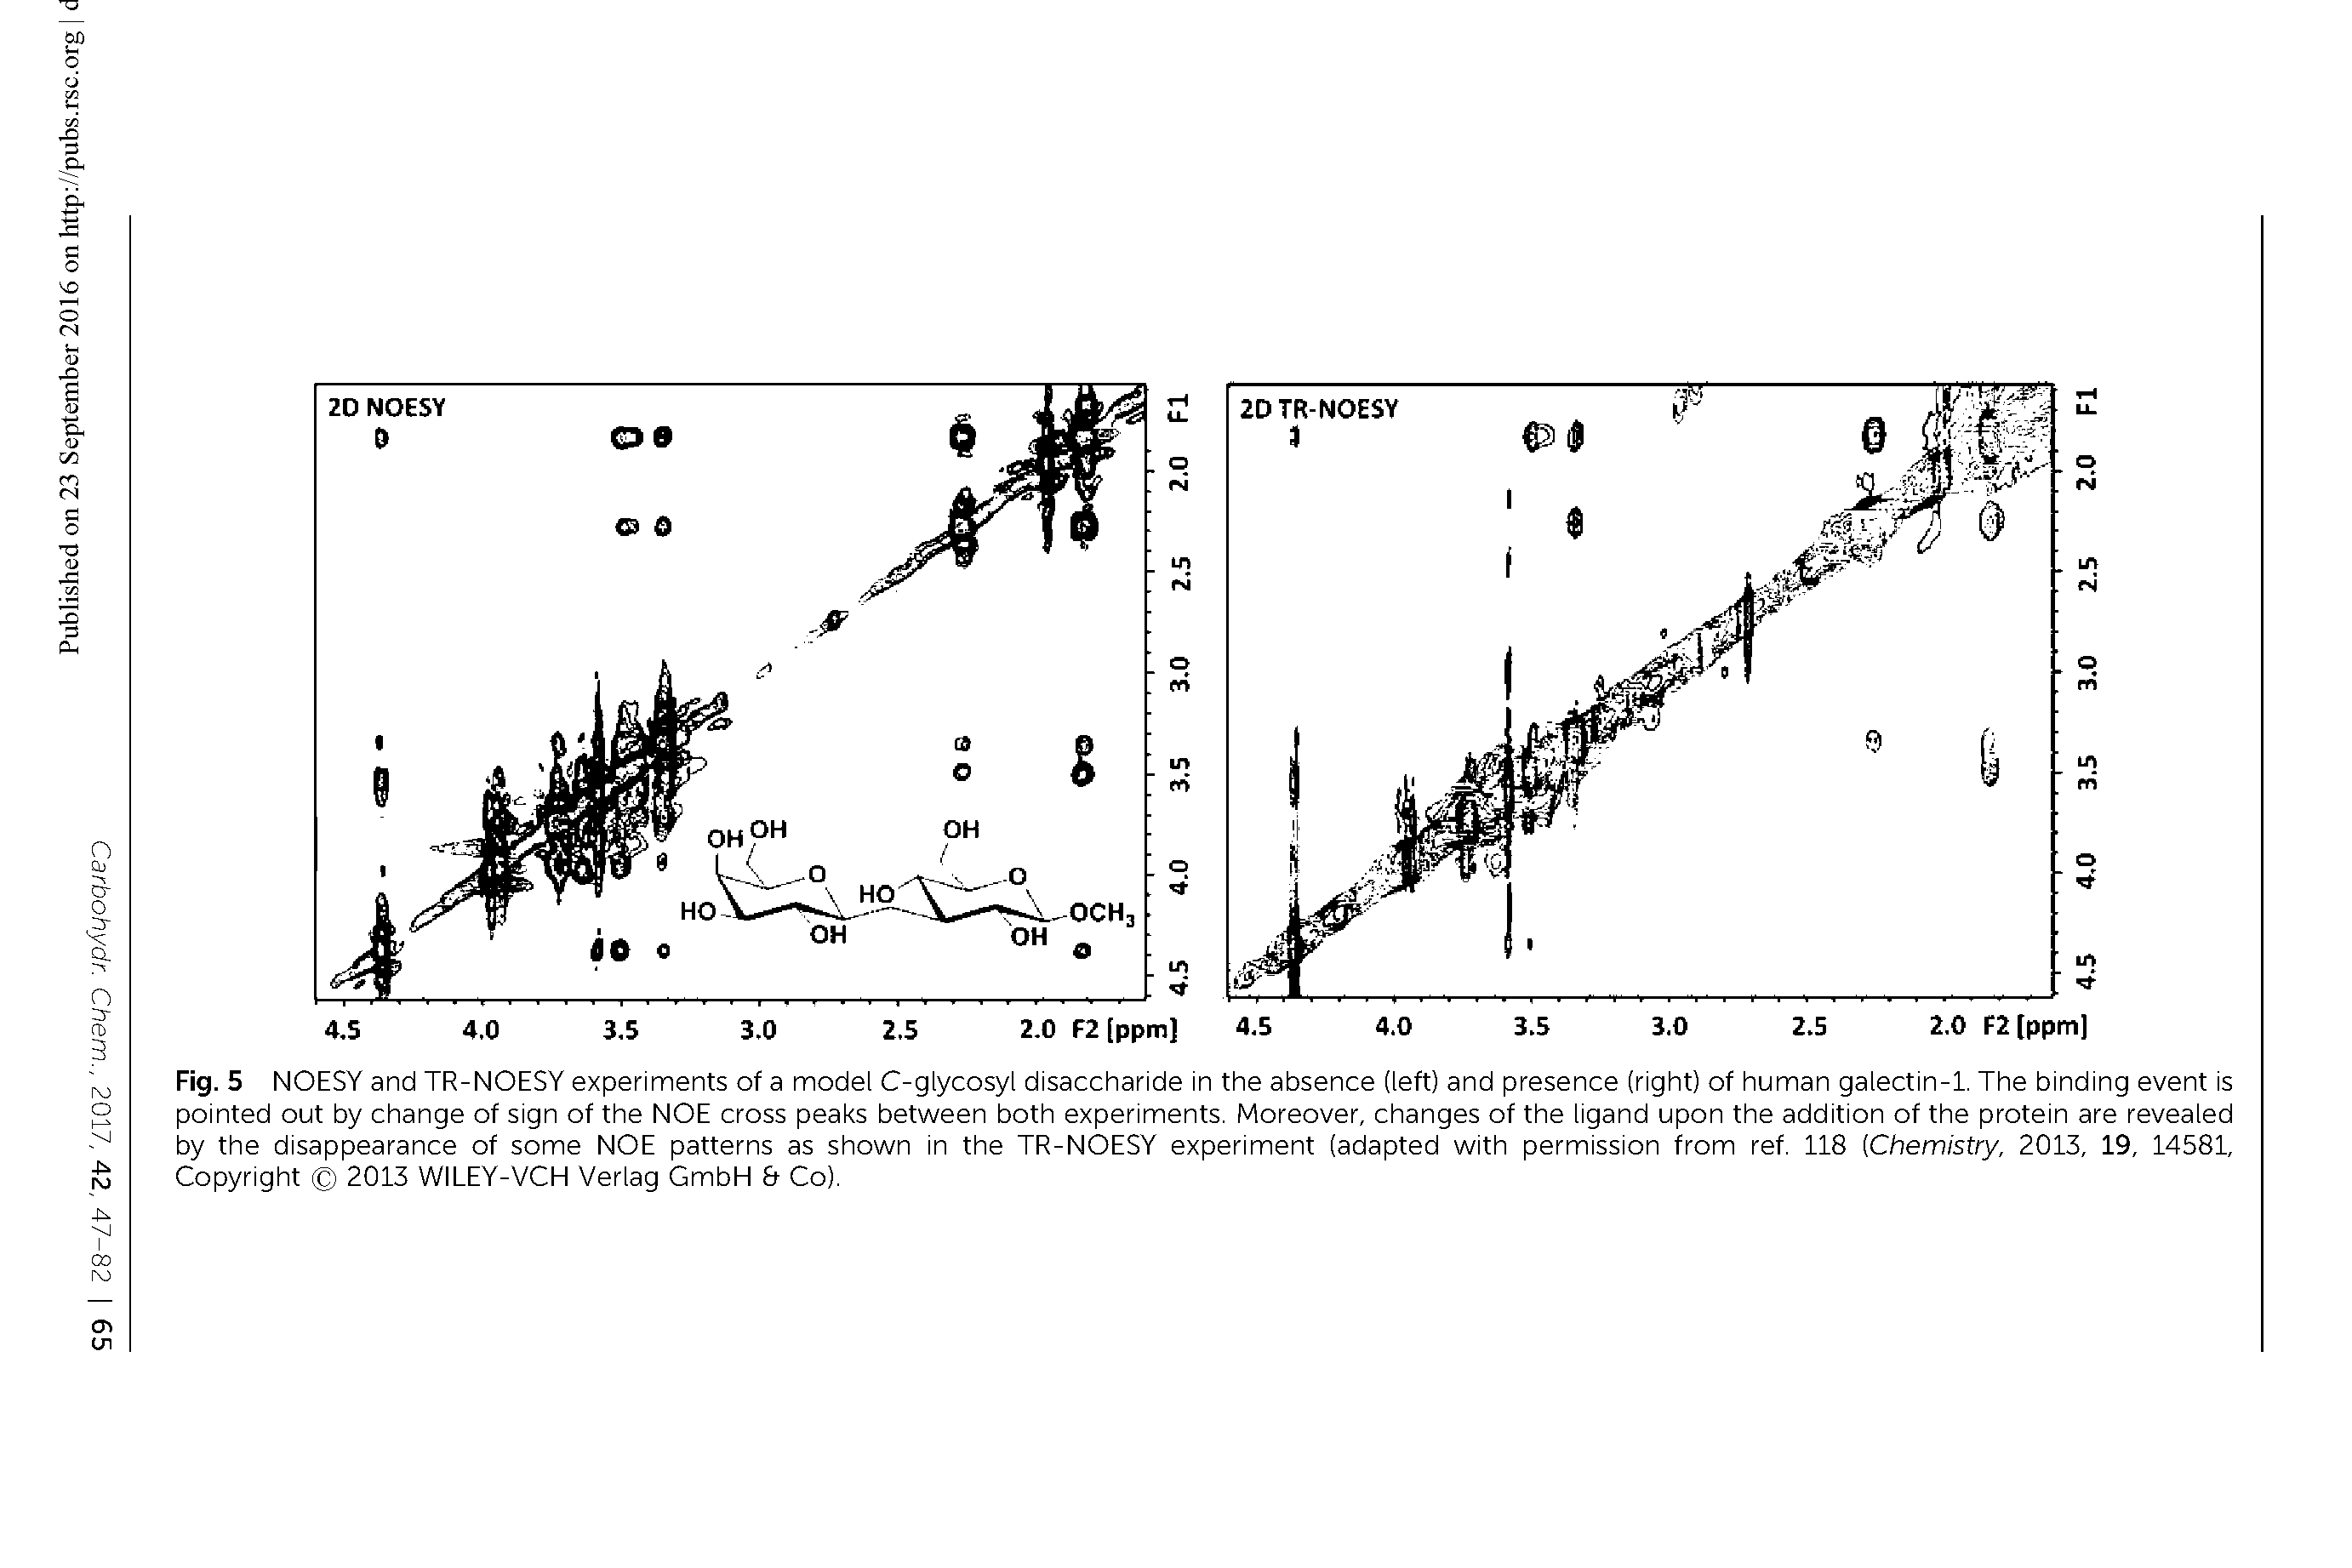 Fig. 5 NOESY and TR-NOESY experiments of a model C-glycosyl disaccharide in the absence (left) and presence (right) of human galectin-1. The binding event is pointed out by change of sign of the NOE cross peaks between both experiments. Moreover, changes of the ligand upon the addition of the protein are revealed by the disappearance of some NOE patterns as shown in the TR-NOESY experiment (adapted with permission from ref. 118 (Chemistry, 2013, 19, 14581, Copyright 2013 WILEY-VCH Verlag GmbH Co).